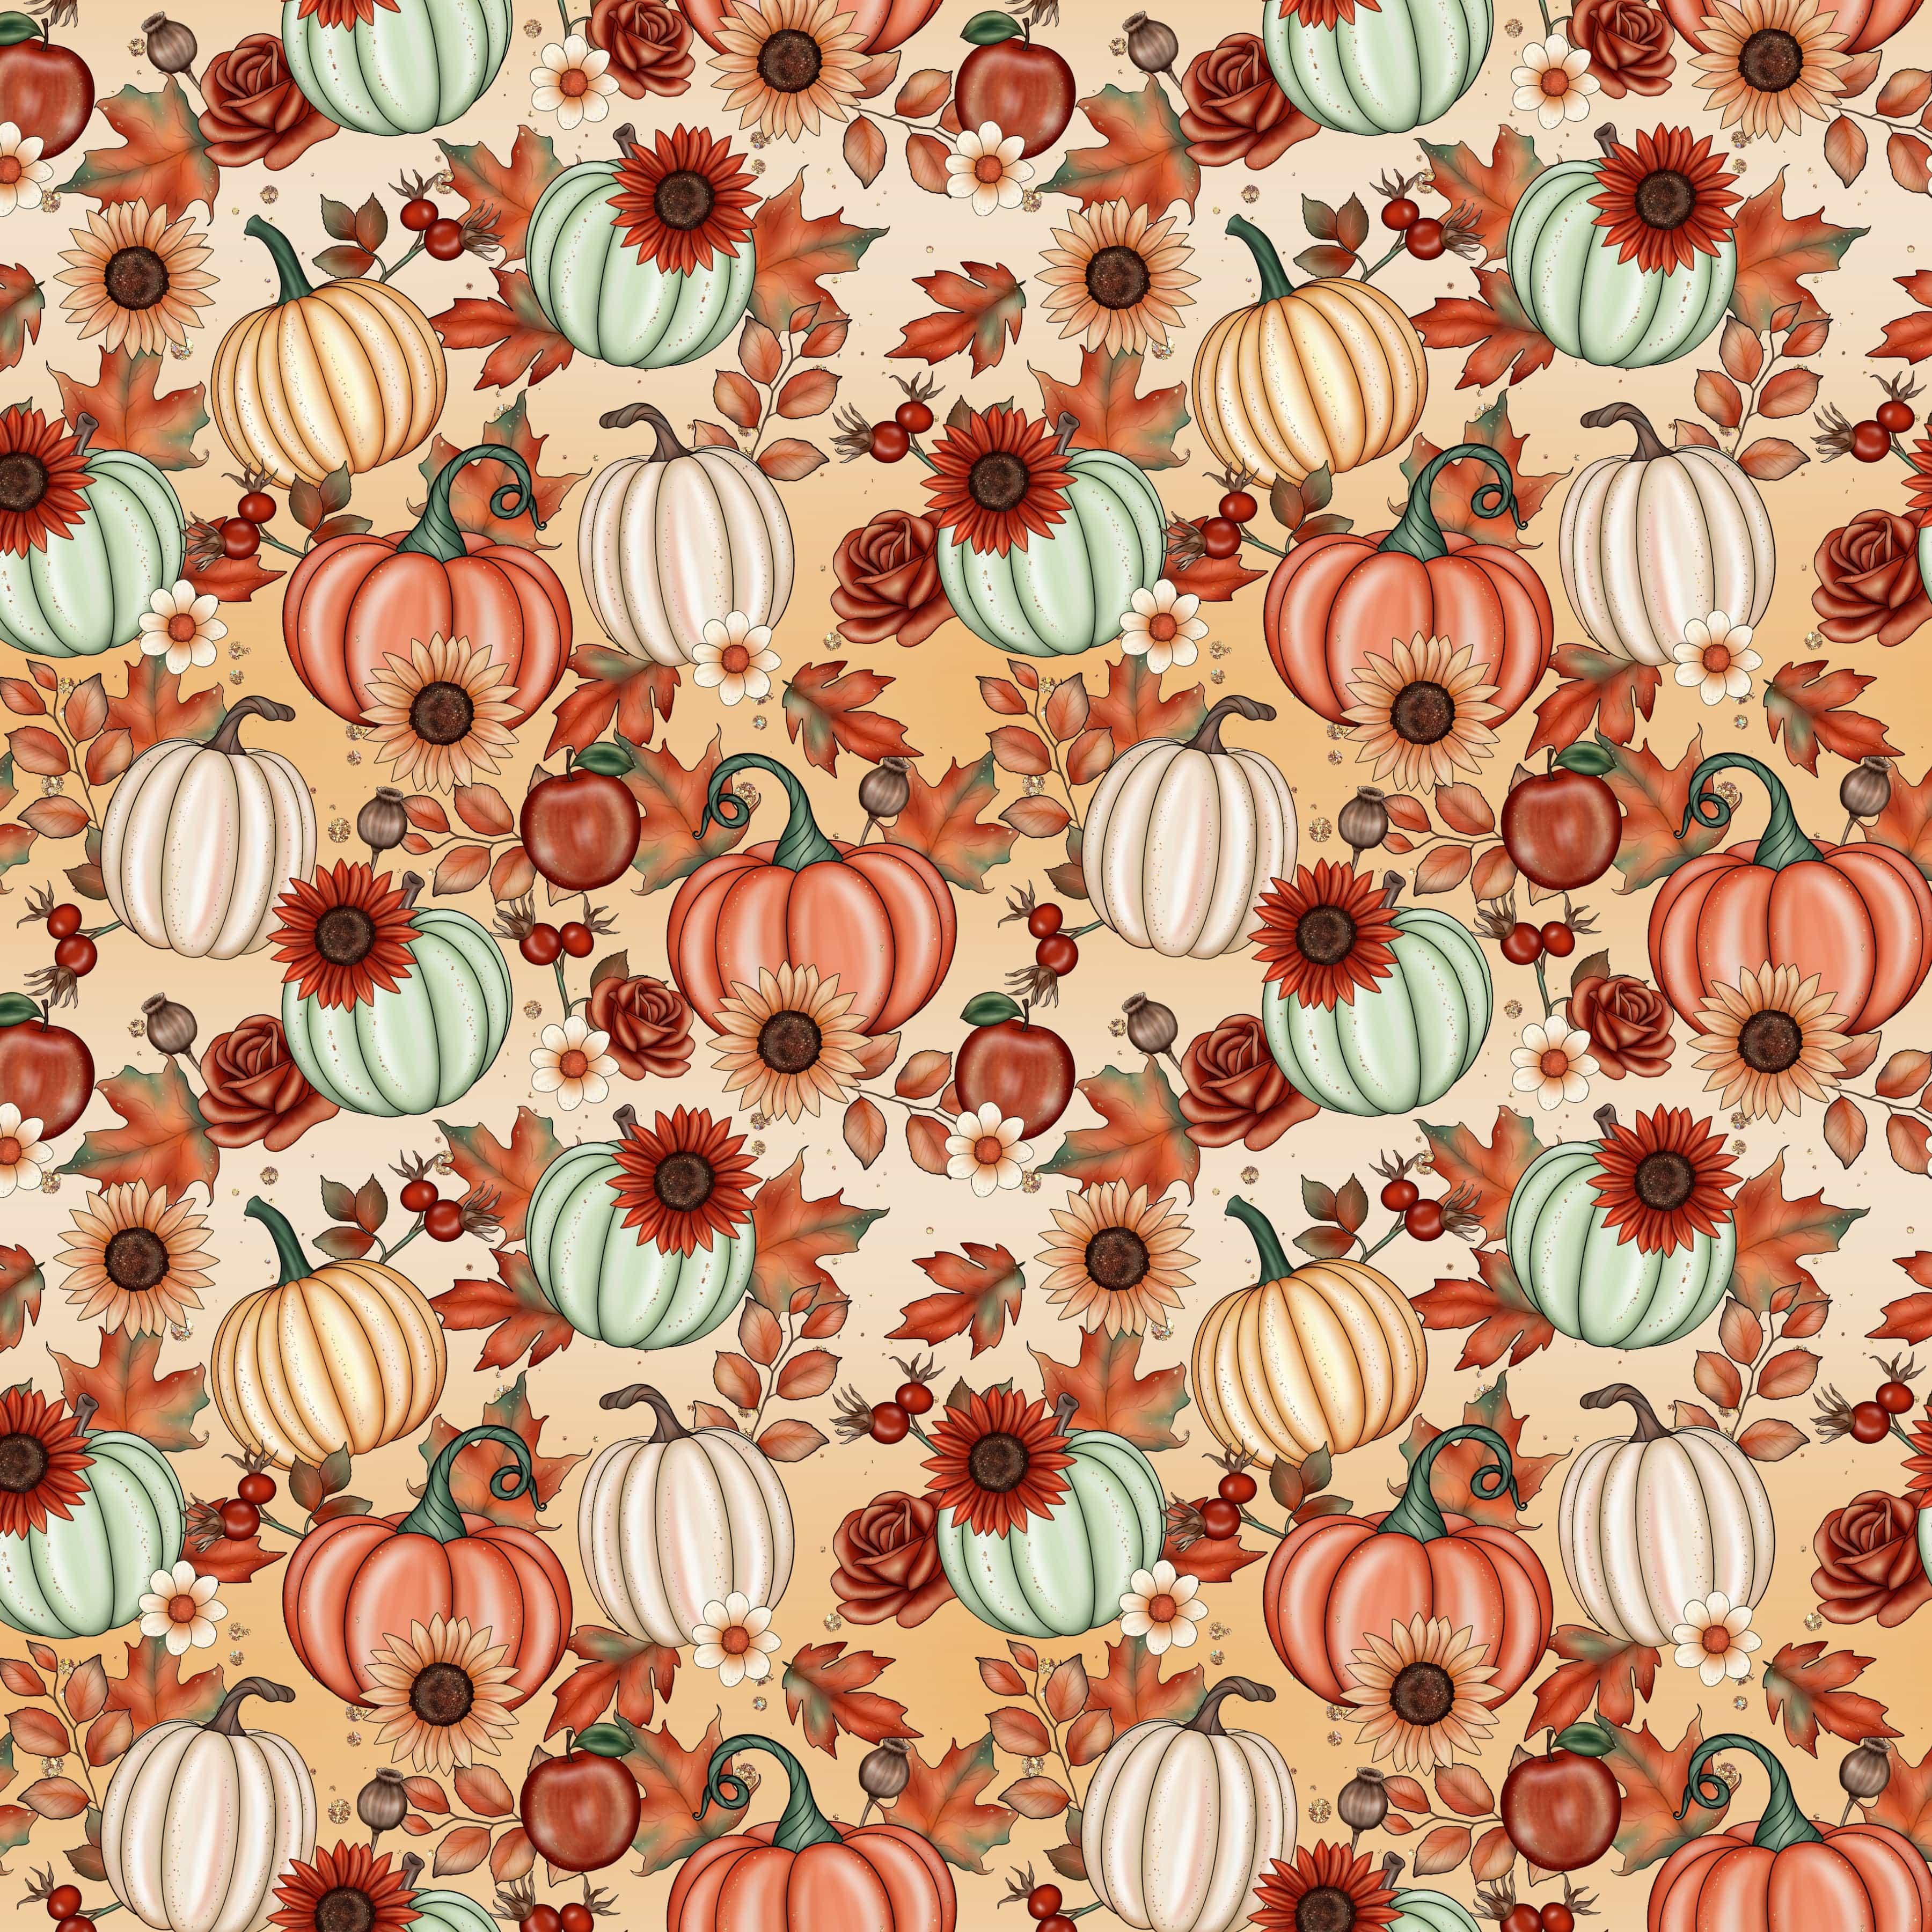 Gaynor Carradice's Autumn Favorites Collection Pumpkin Fields 12 x 12 Double-Sided Scrapbook Paper by SSC Designs - Scrapbook Supply Companies